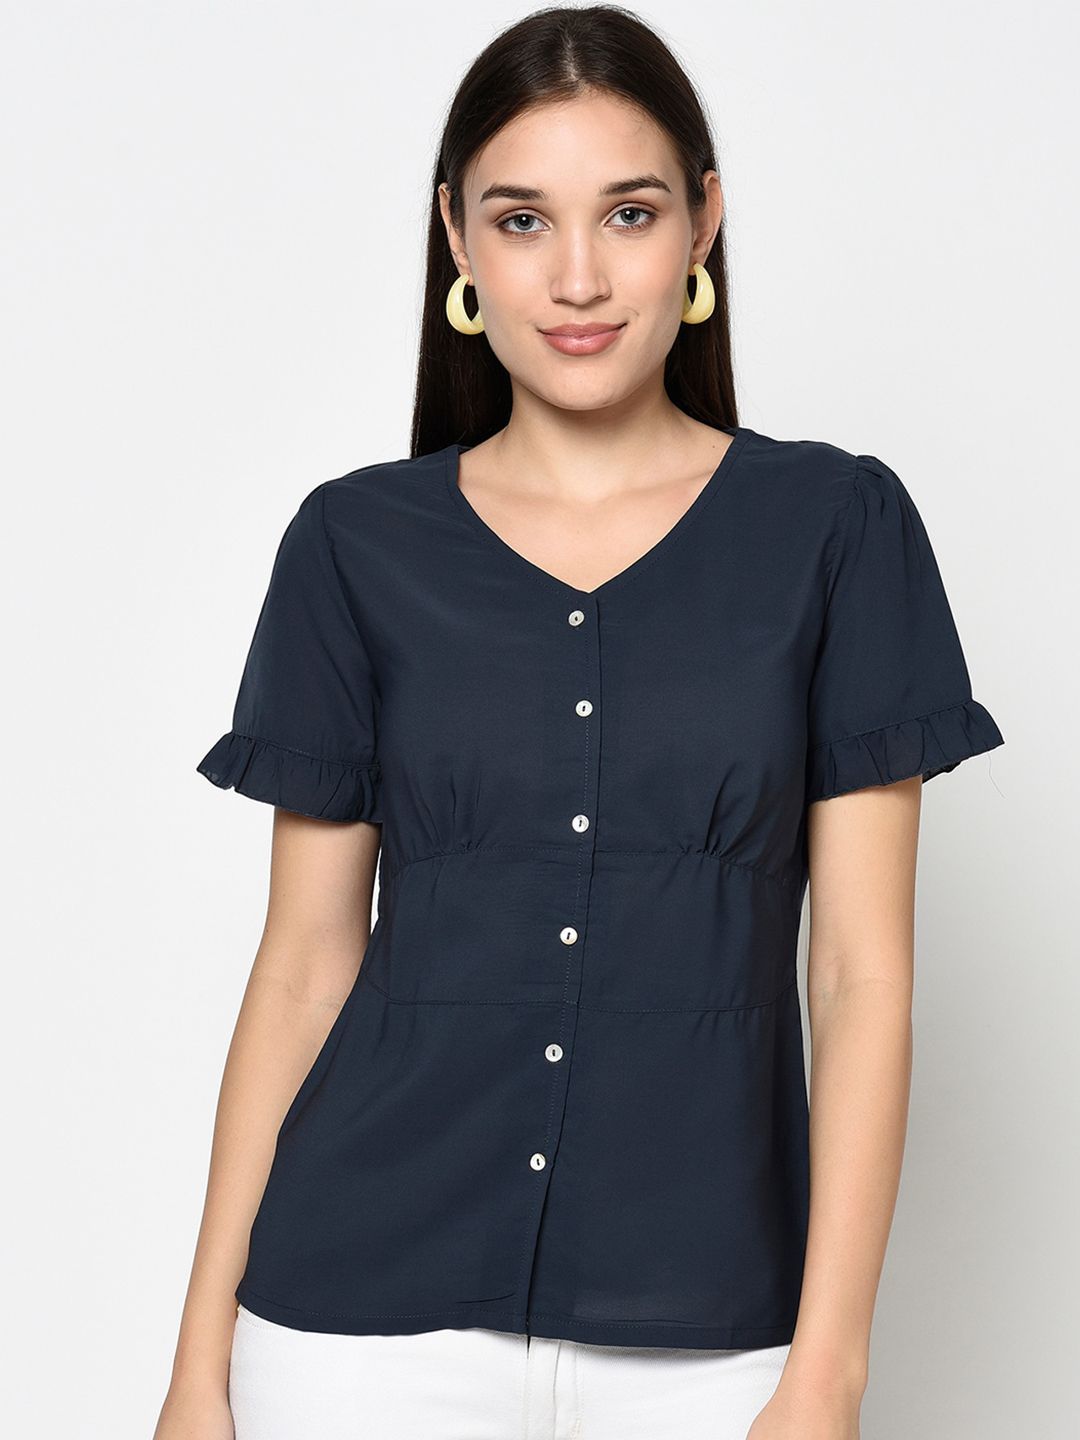 Miss Grace V-Neck Puff Sleeves Shirt Style Top Price in India